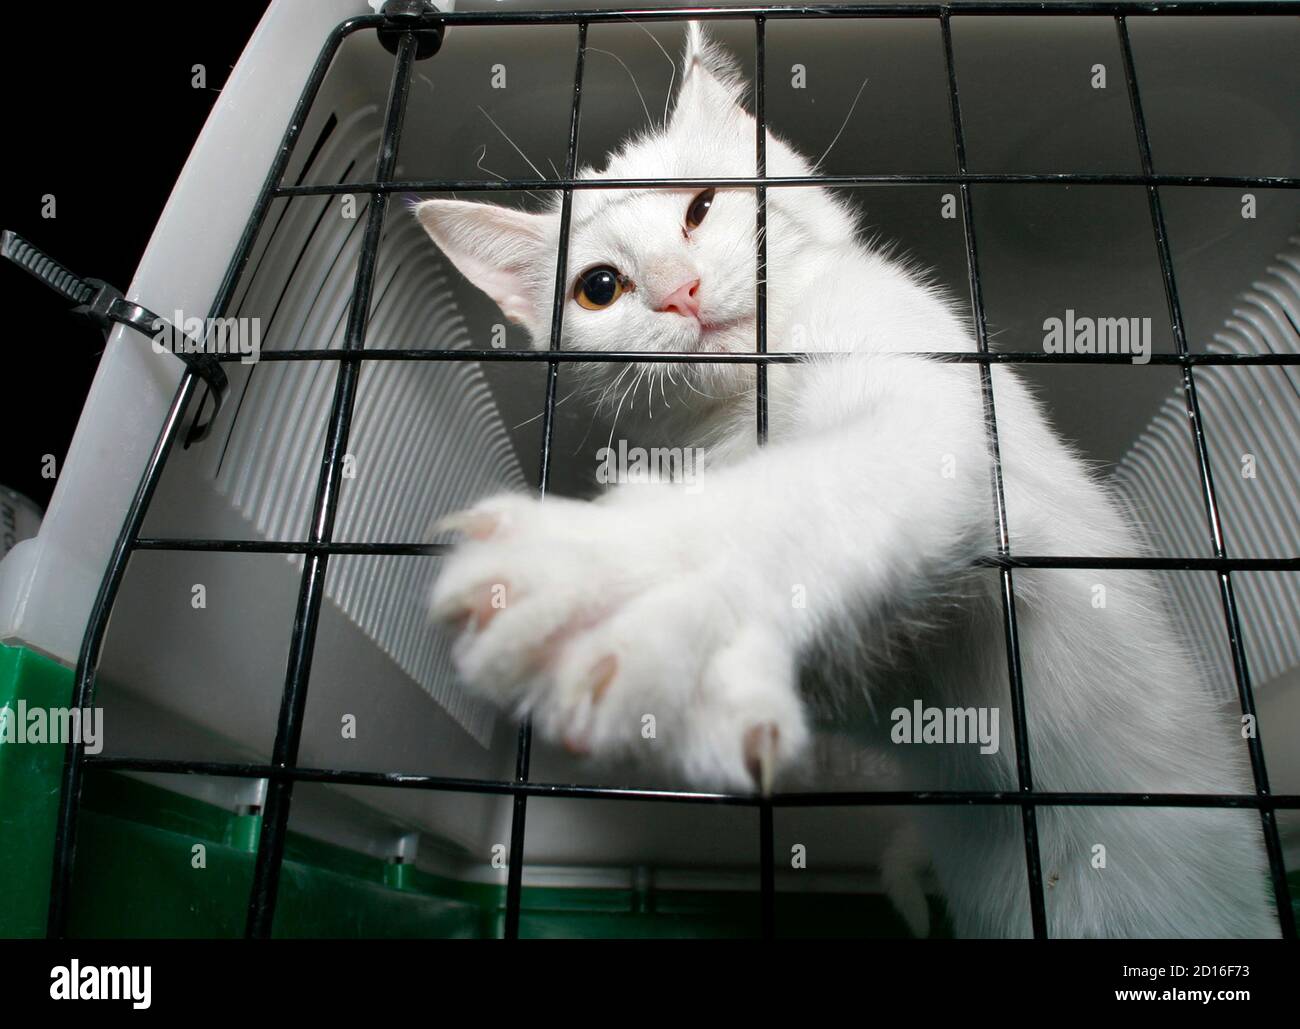 A cat reaches out from its crate after arriving from Lebanon by cargo jet at McCarran International Airport in Las Vegas September 26, 2006. About 300 dogs and cats, displaced by the recent war between Israel and Hezbollah militants, are enroute to the Best Friends Animal Sanctuary near Kanab, Utah. The rescue program was organized by the Best Friends Animal Society after Lebanon's only humane society, Beirut for the Ethical Treatment of Animals (BETA), was overwhelmed with displaced pets, organizers said. REUTERS/Steve Marcus (UNITED STATES) Stock Photo